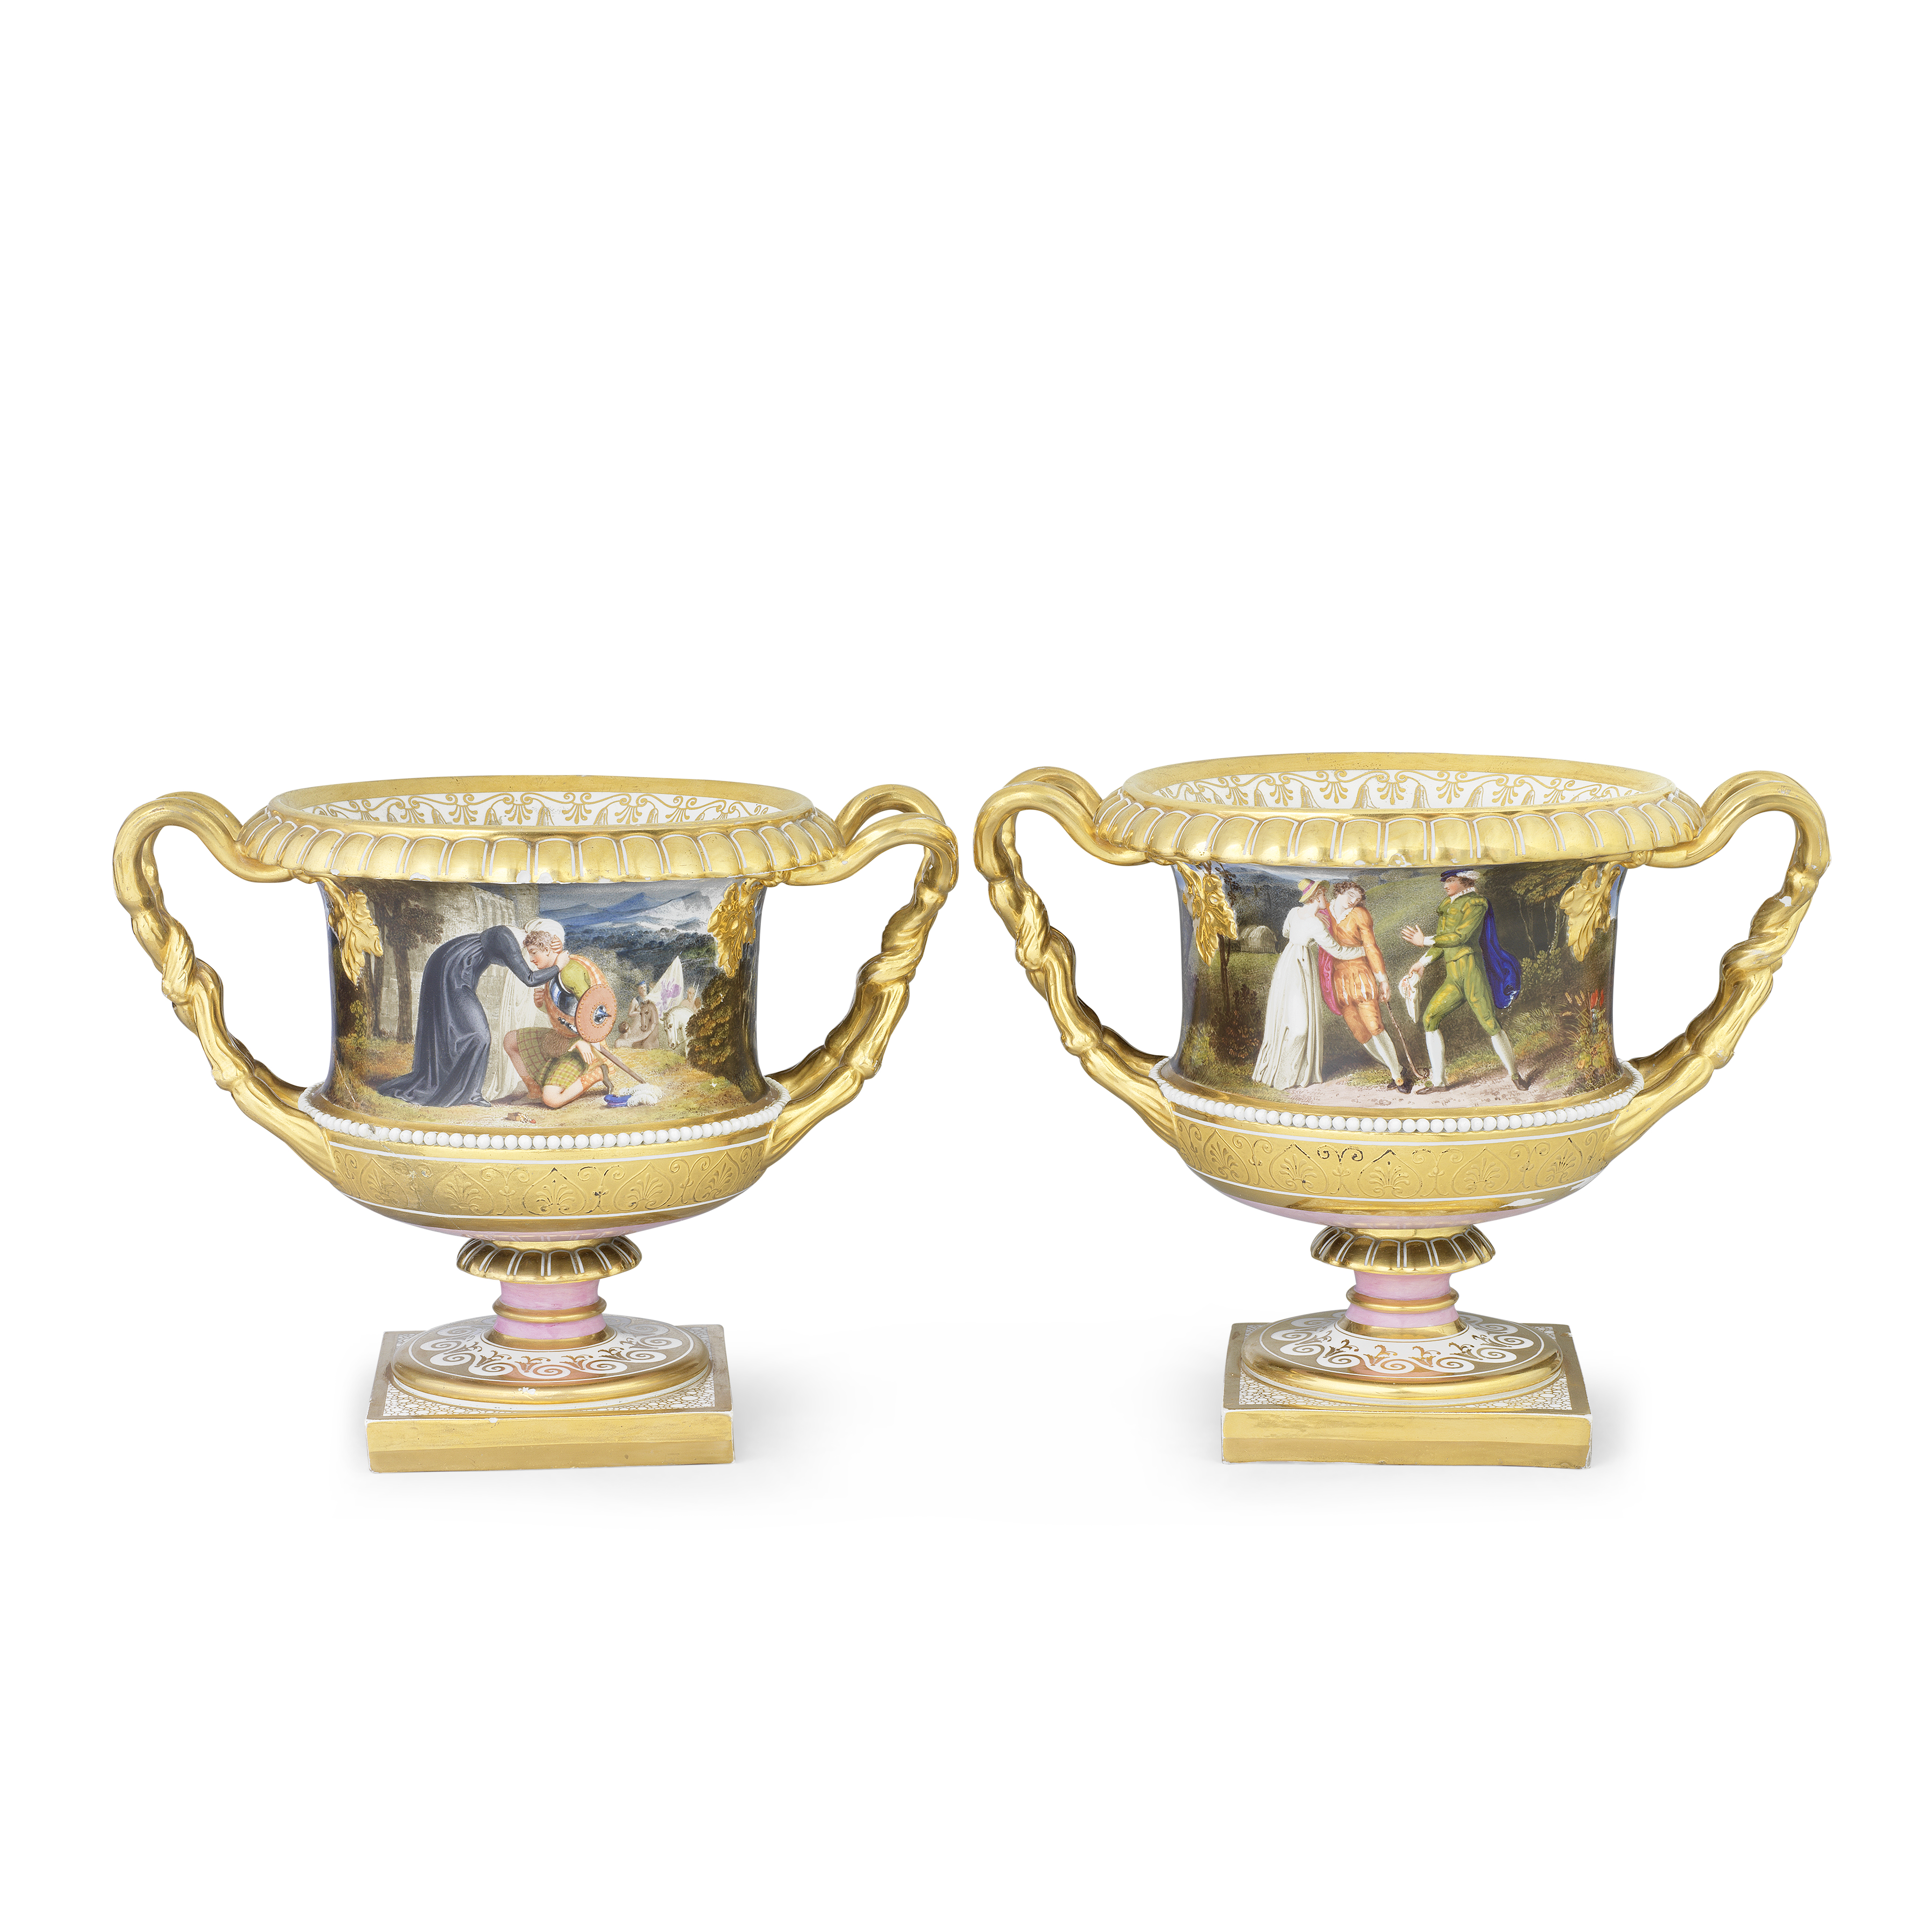 A magnificent pair of Flight, Barr and Barr Worcester Warwick vases by Thomas Baxter, circa 1814-16